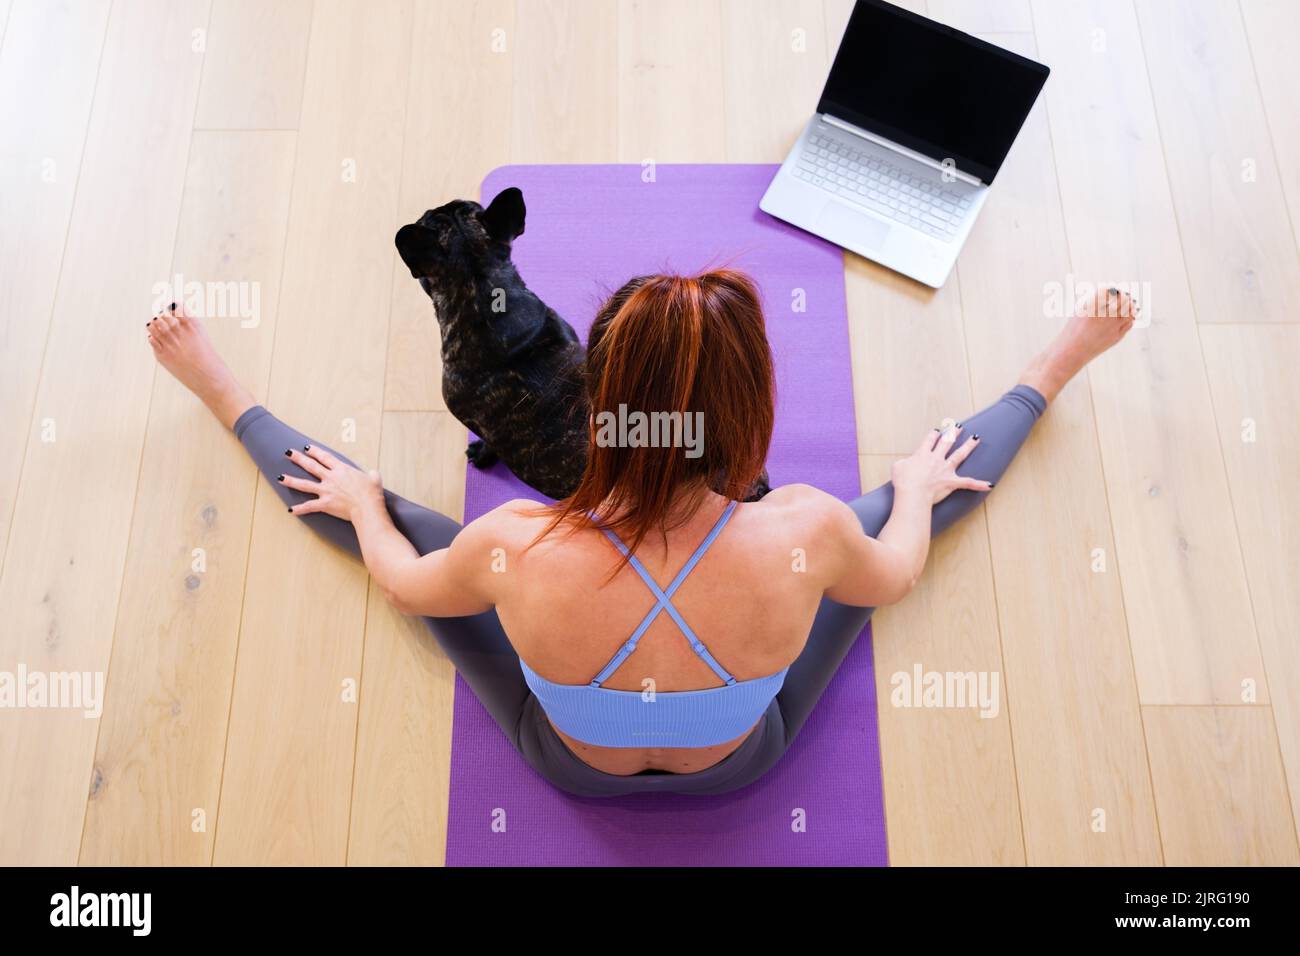 Top view fit sporty healthy woman sits on mat doing following exercises, watching online yoga class on laptop. His pug dog keeps company Stock Photo